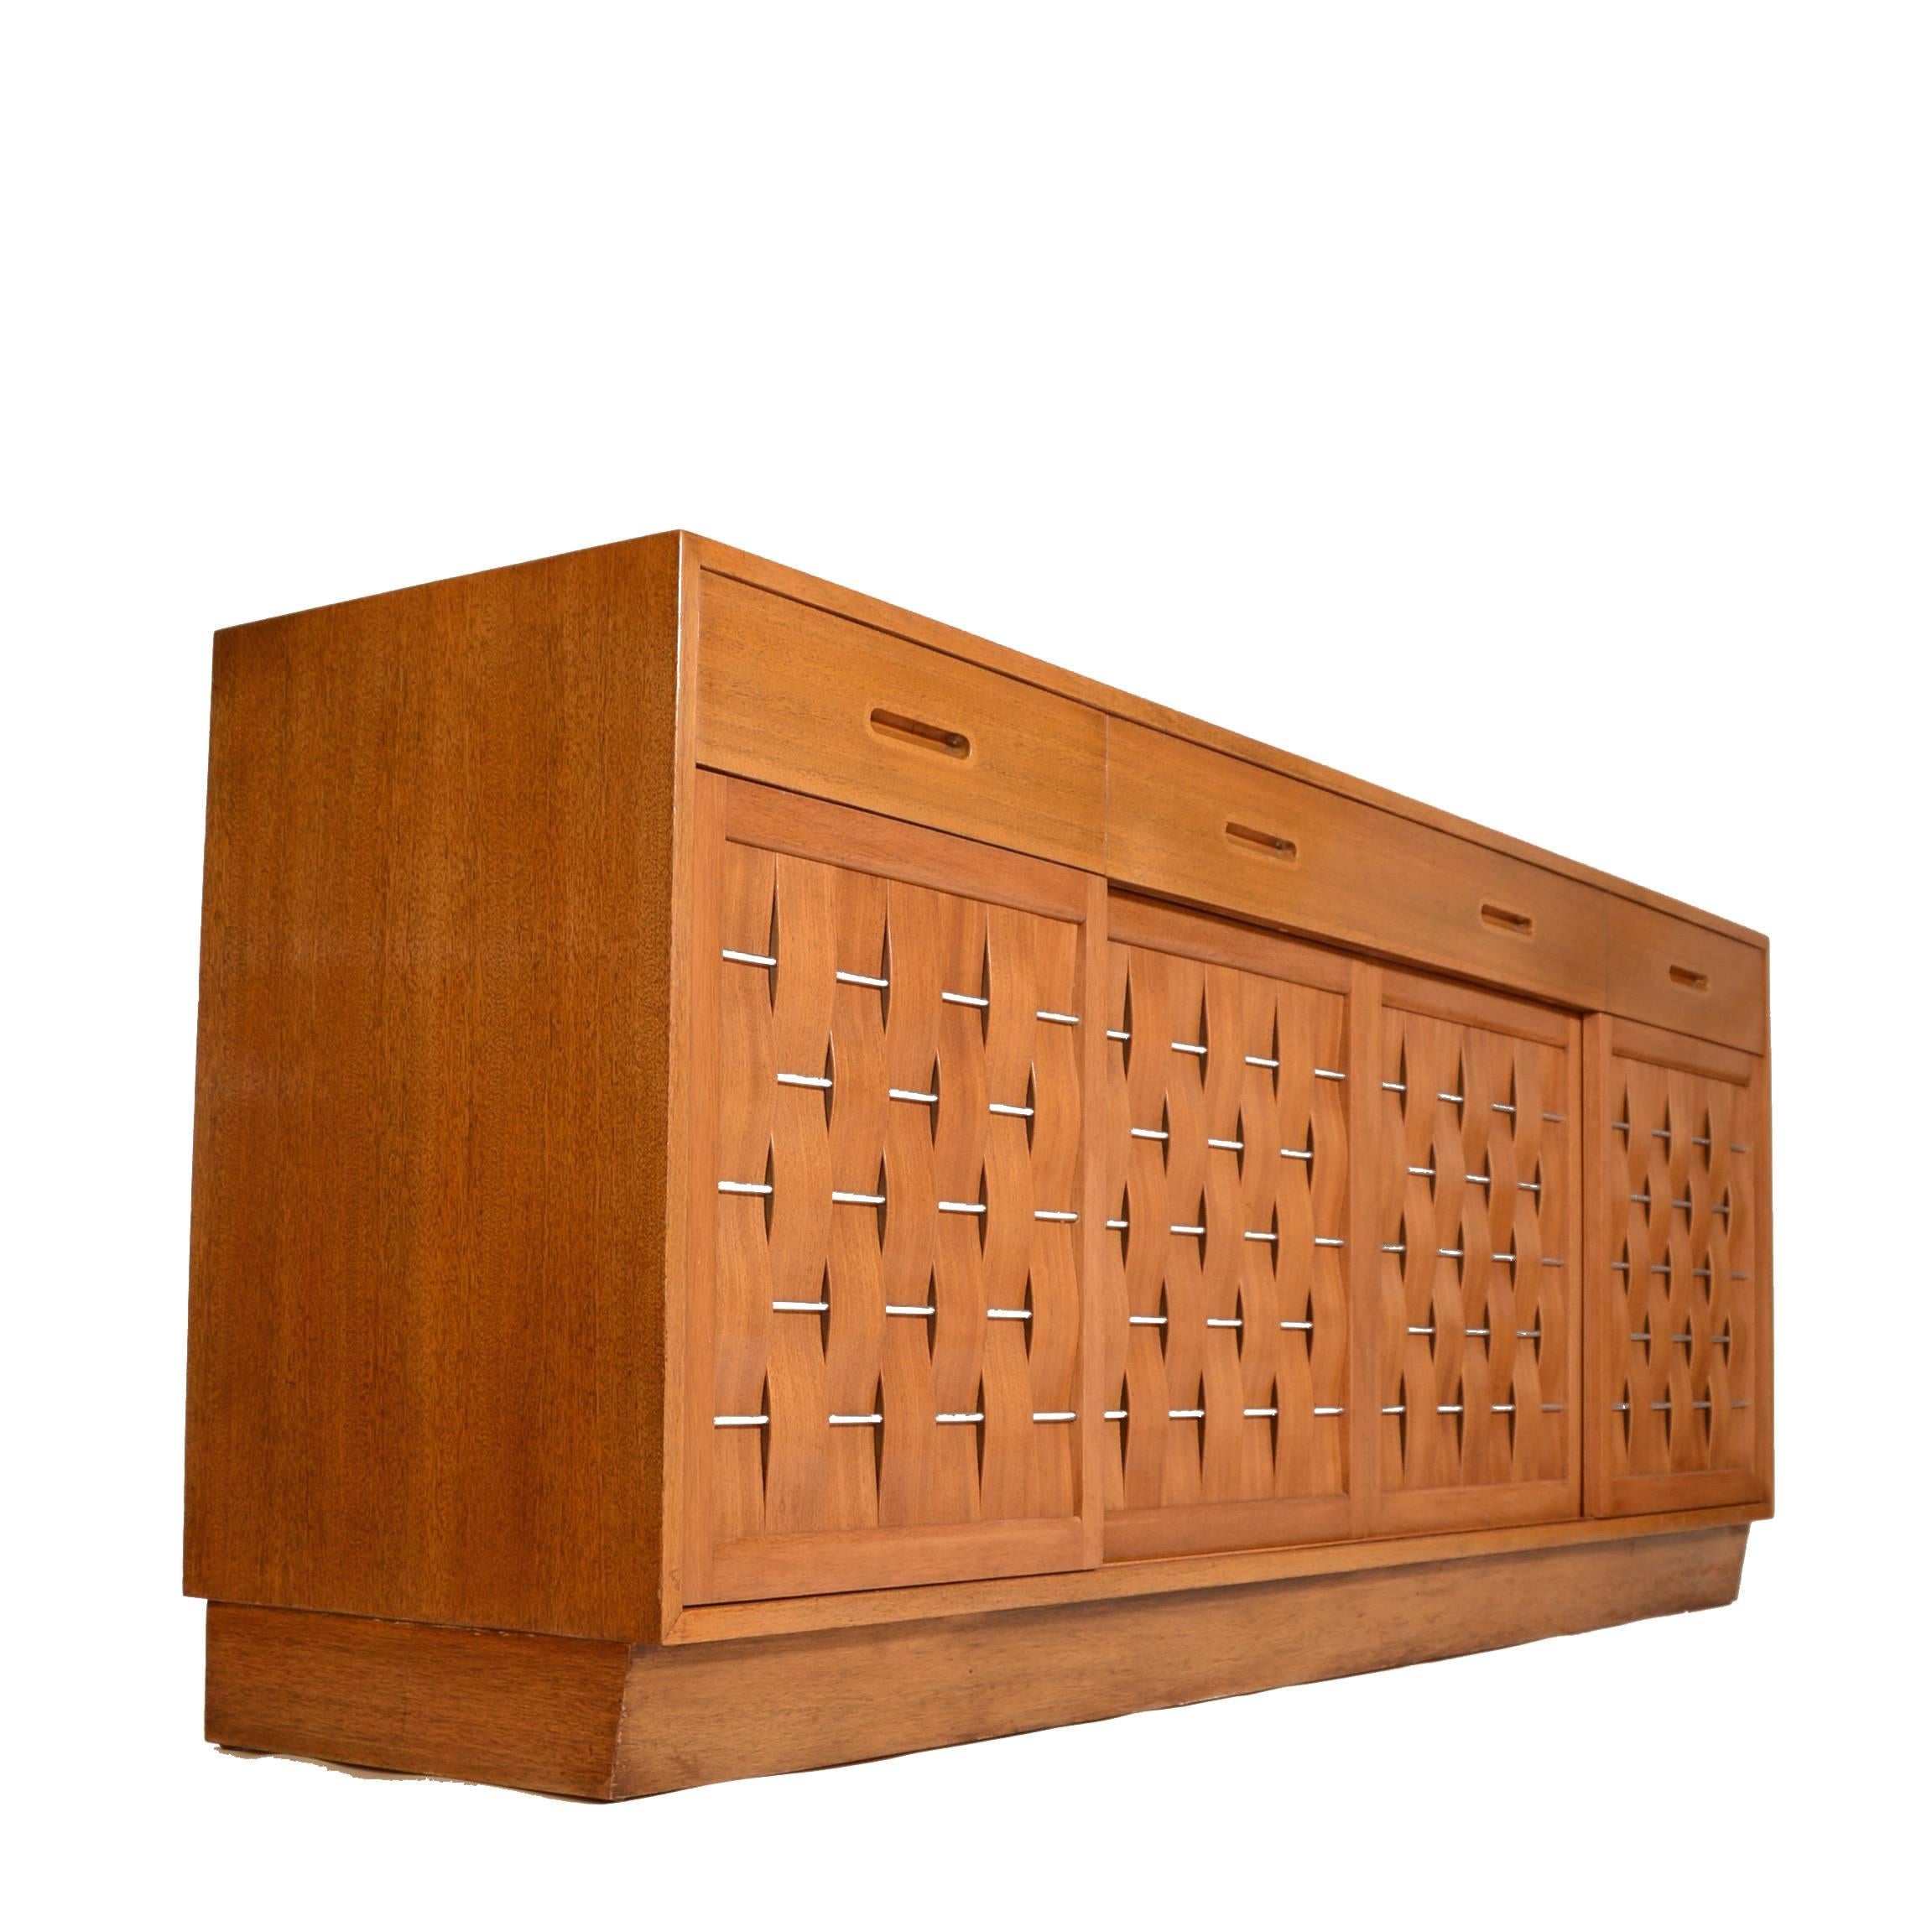 Mahogany Basket Weave Credenza by Edward Wormley for Dunbar In Excellent Condition For Sale In Los Angeles, CA